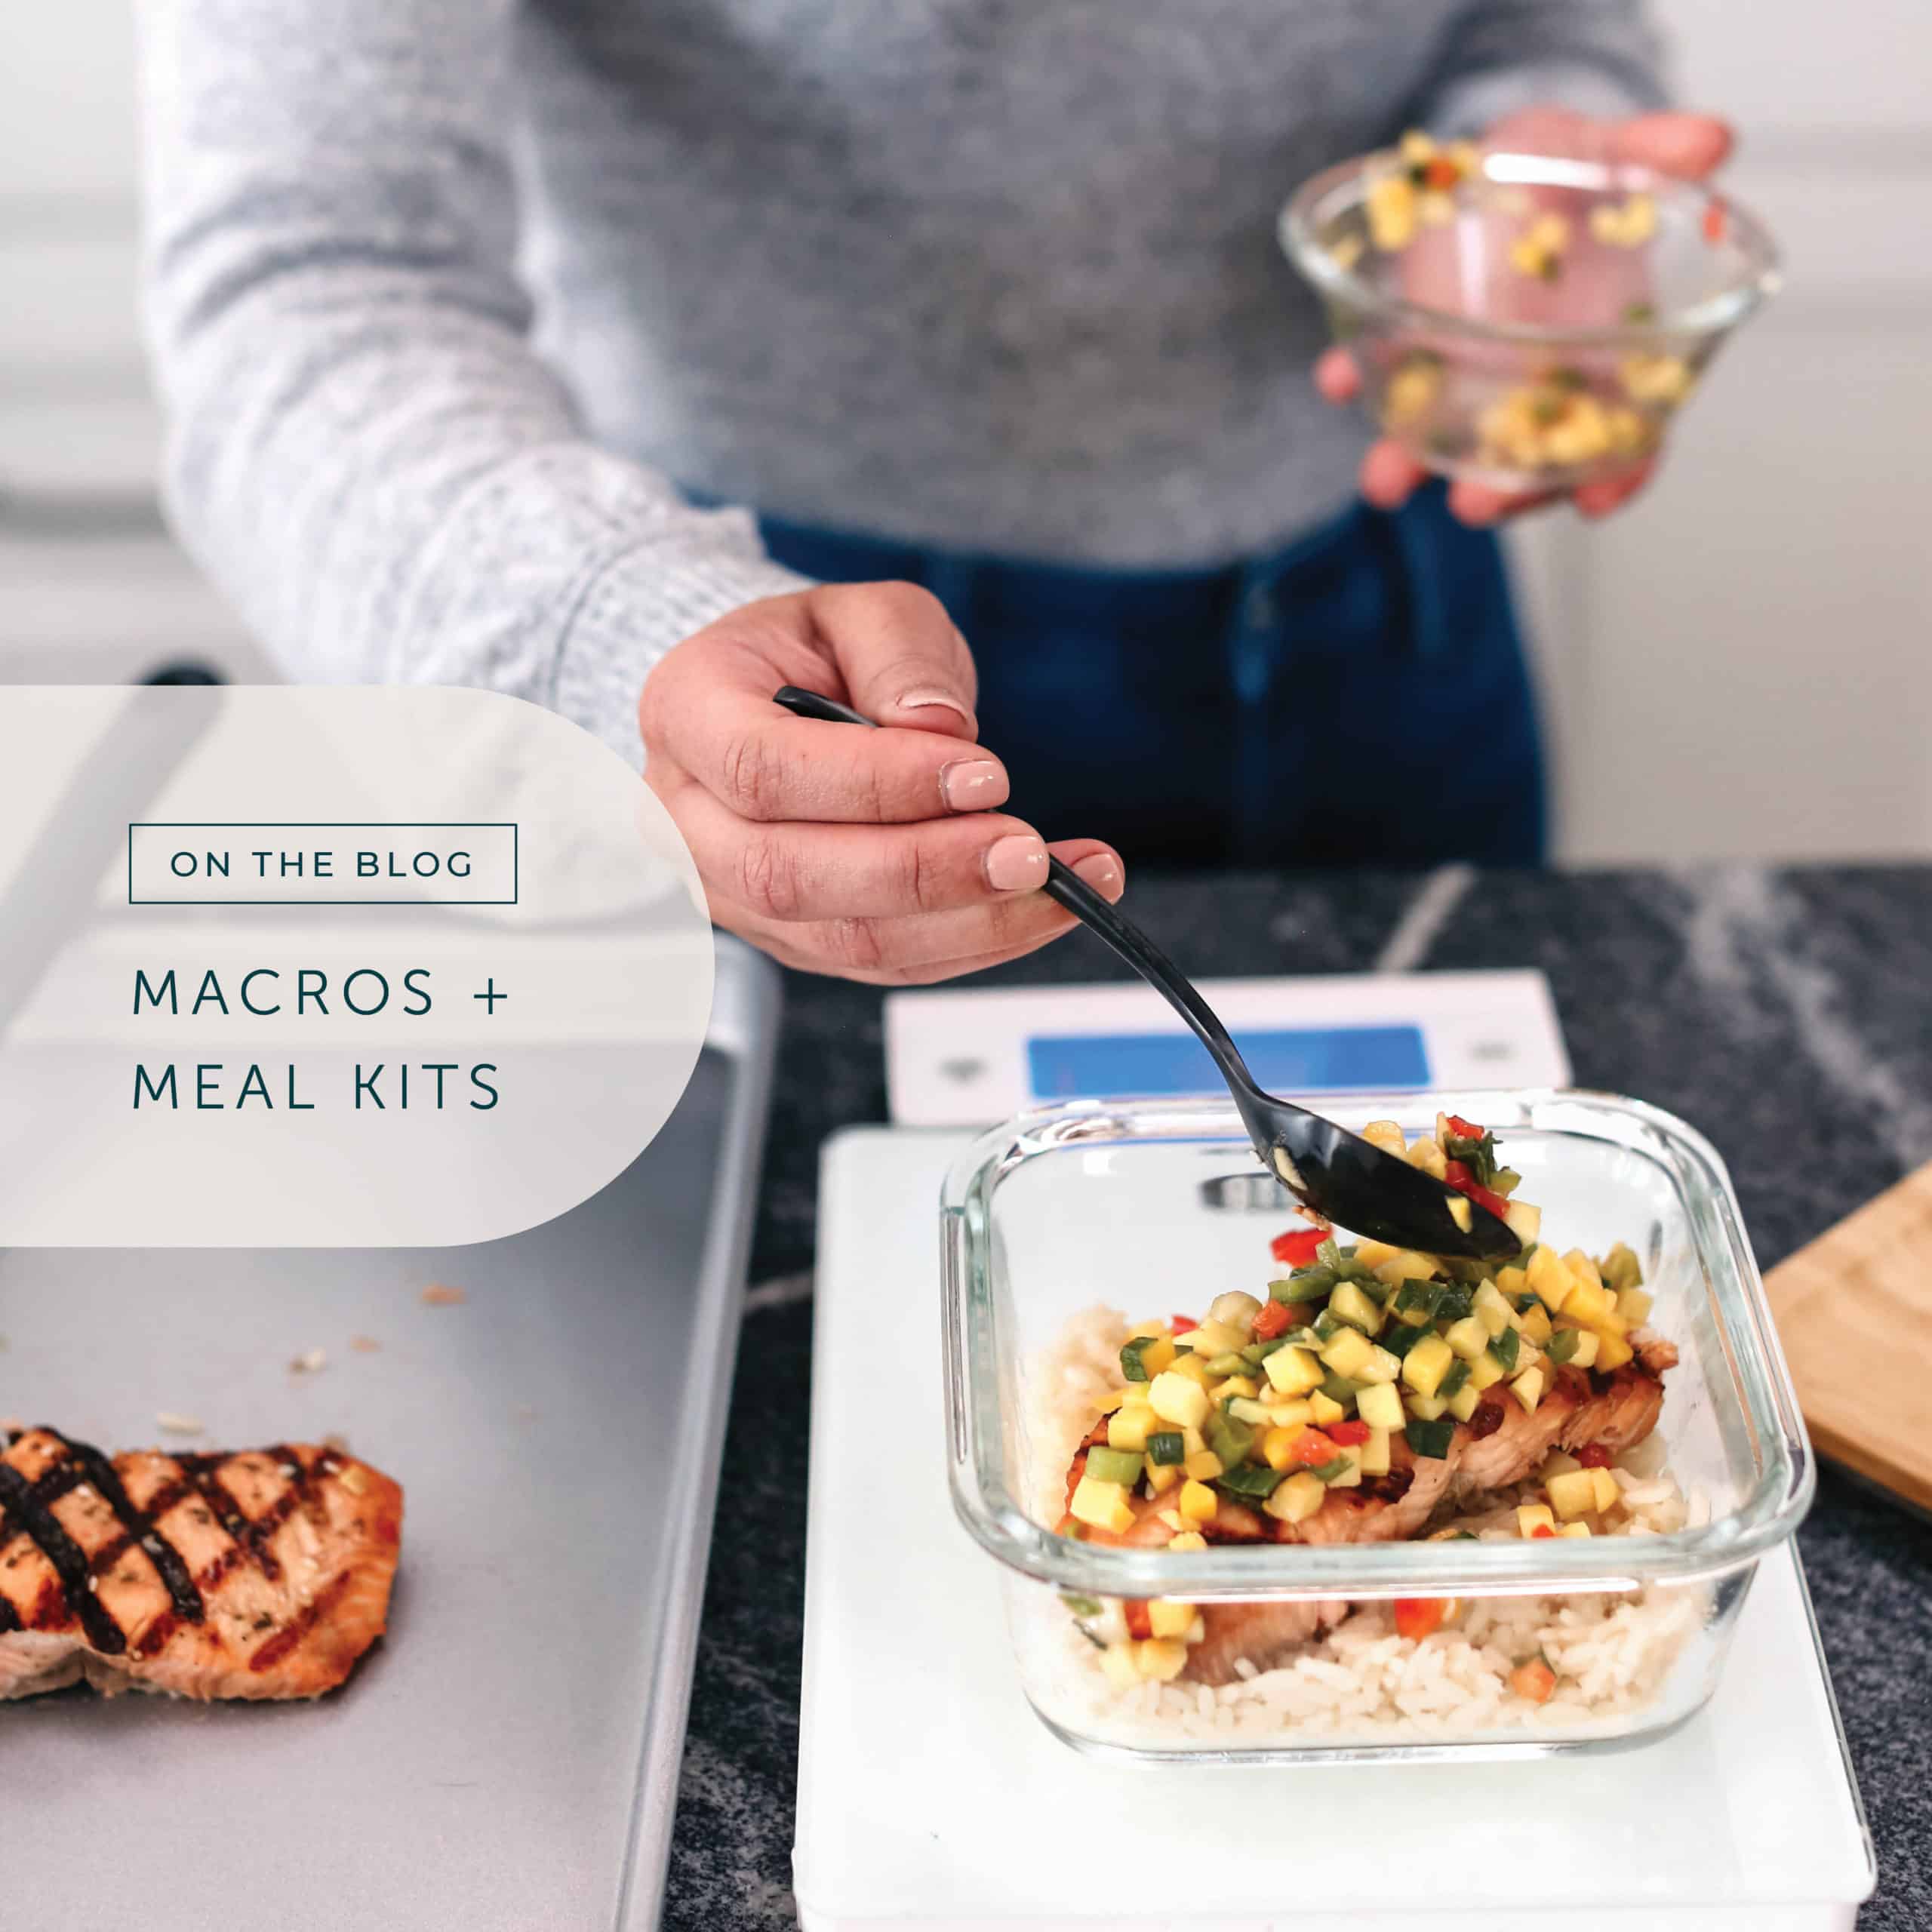 Macros and Meal Kits person weighing food on a scale